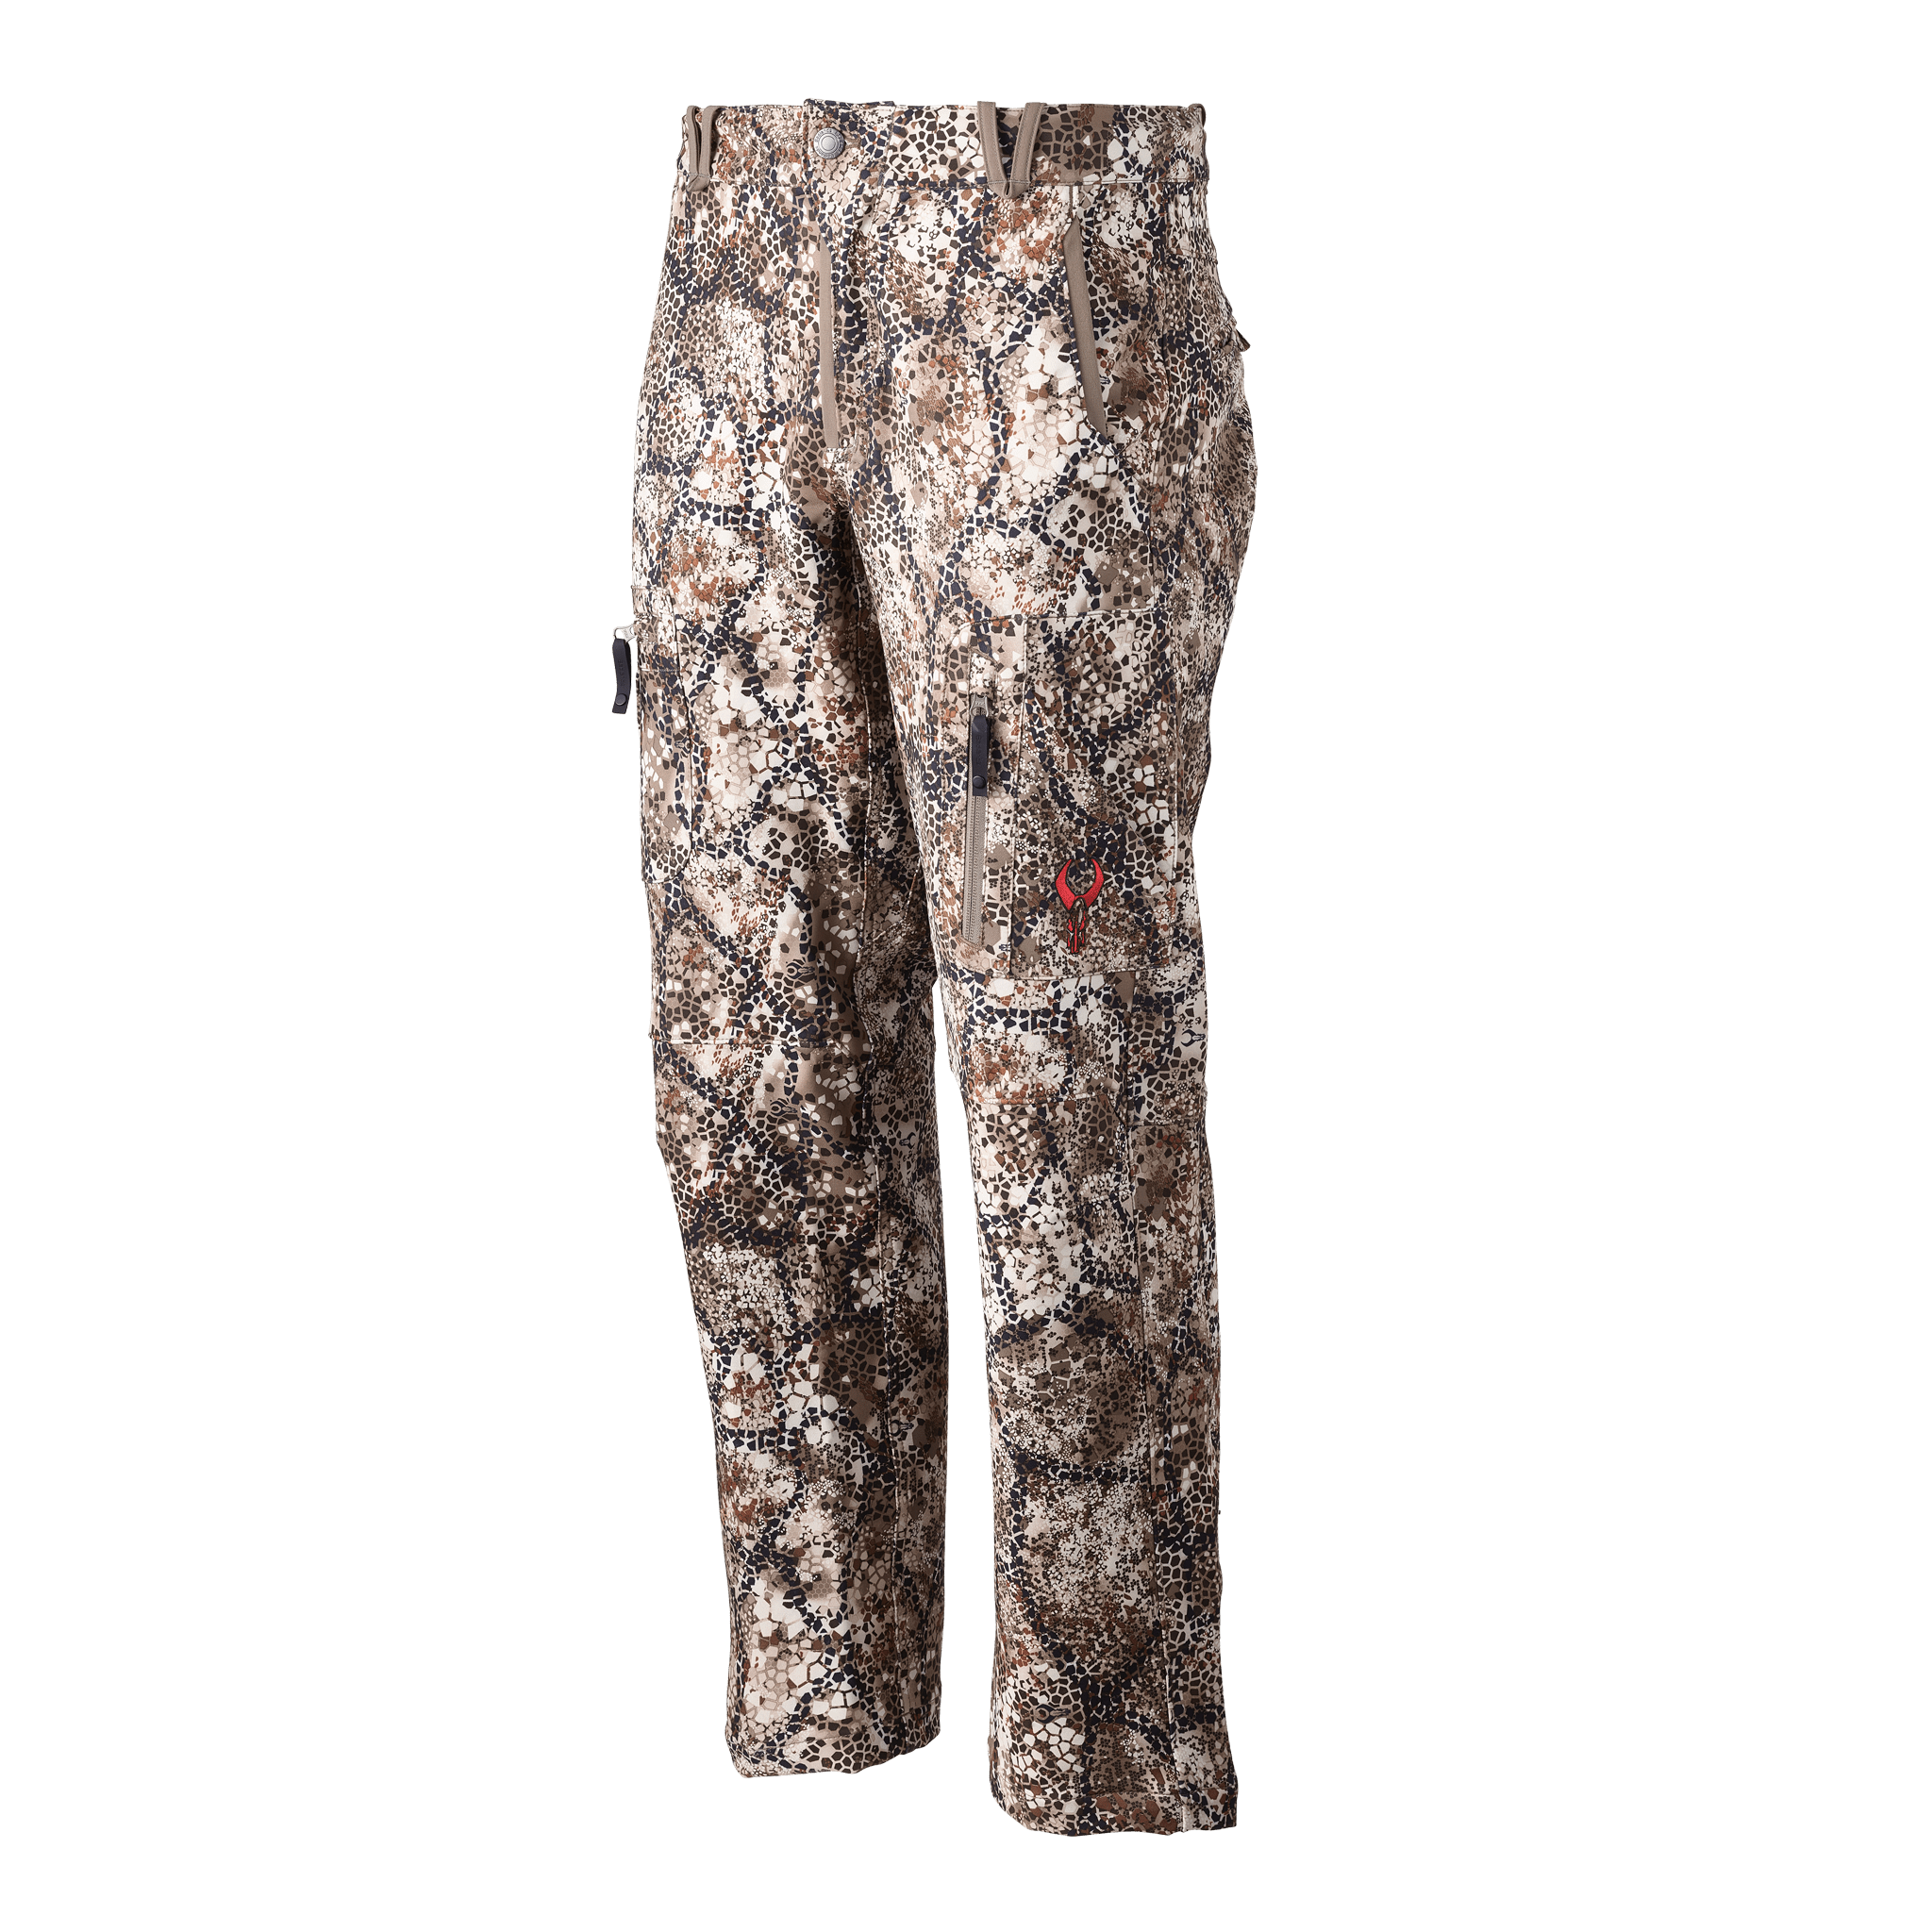 DRAGON SLAYER, XL, 37 in to 40 in Fits Waist Size, Fire Pants